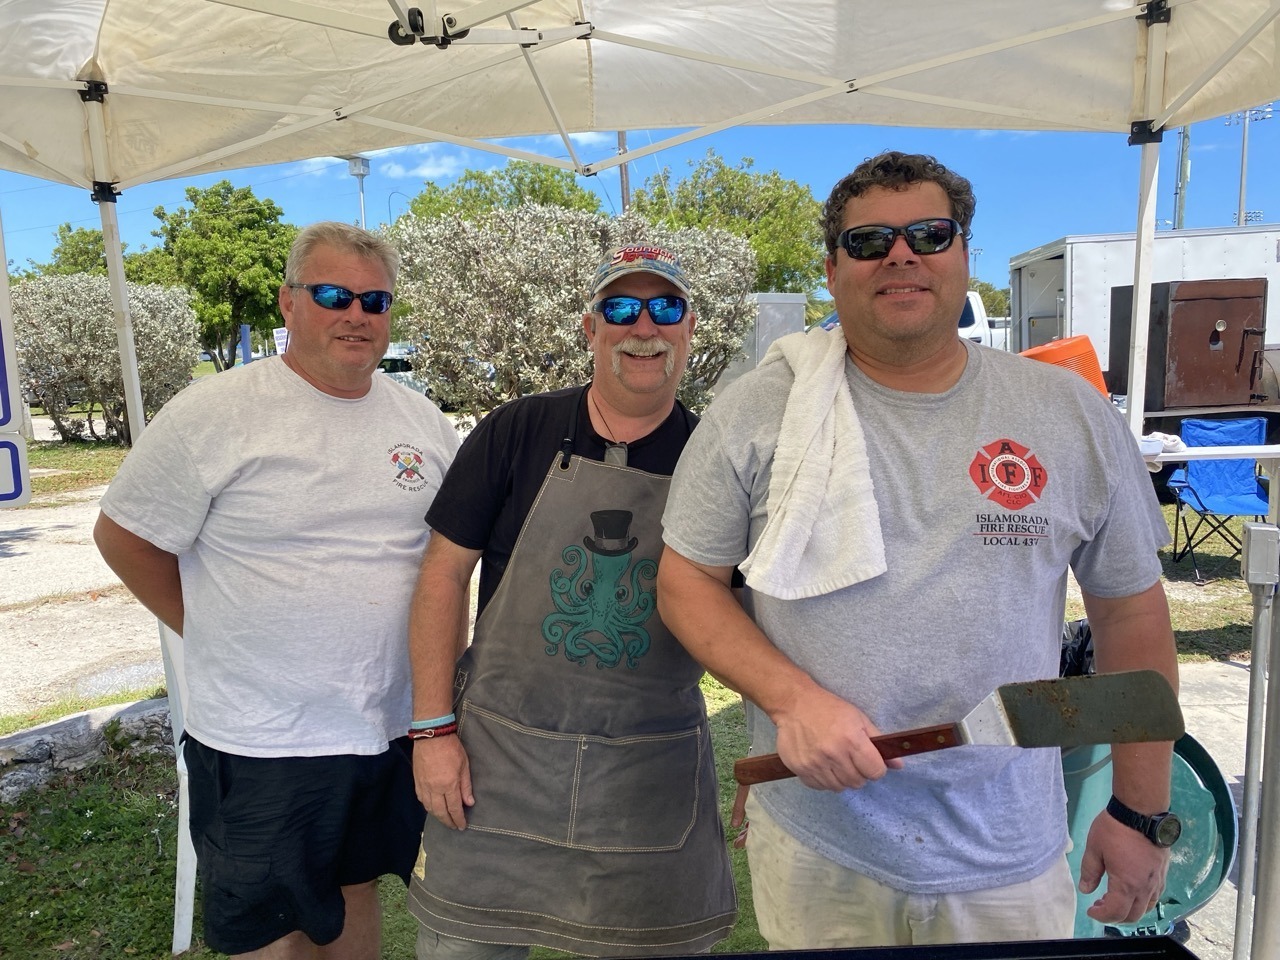 IN PICTURES: ISLAMORADA FIREFIGHTERS FIRE UP THE GRILLS FOR A COMMUNITY BARBECUE